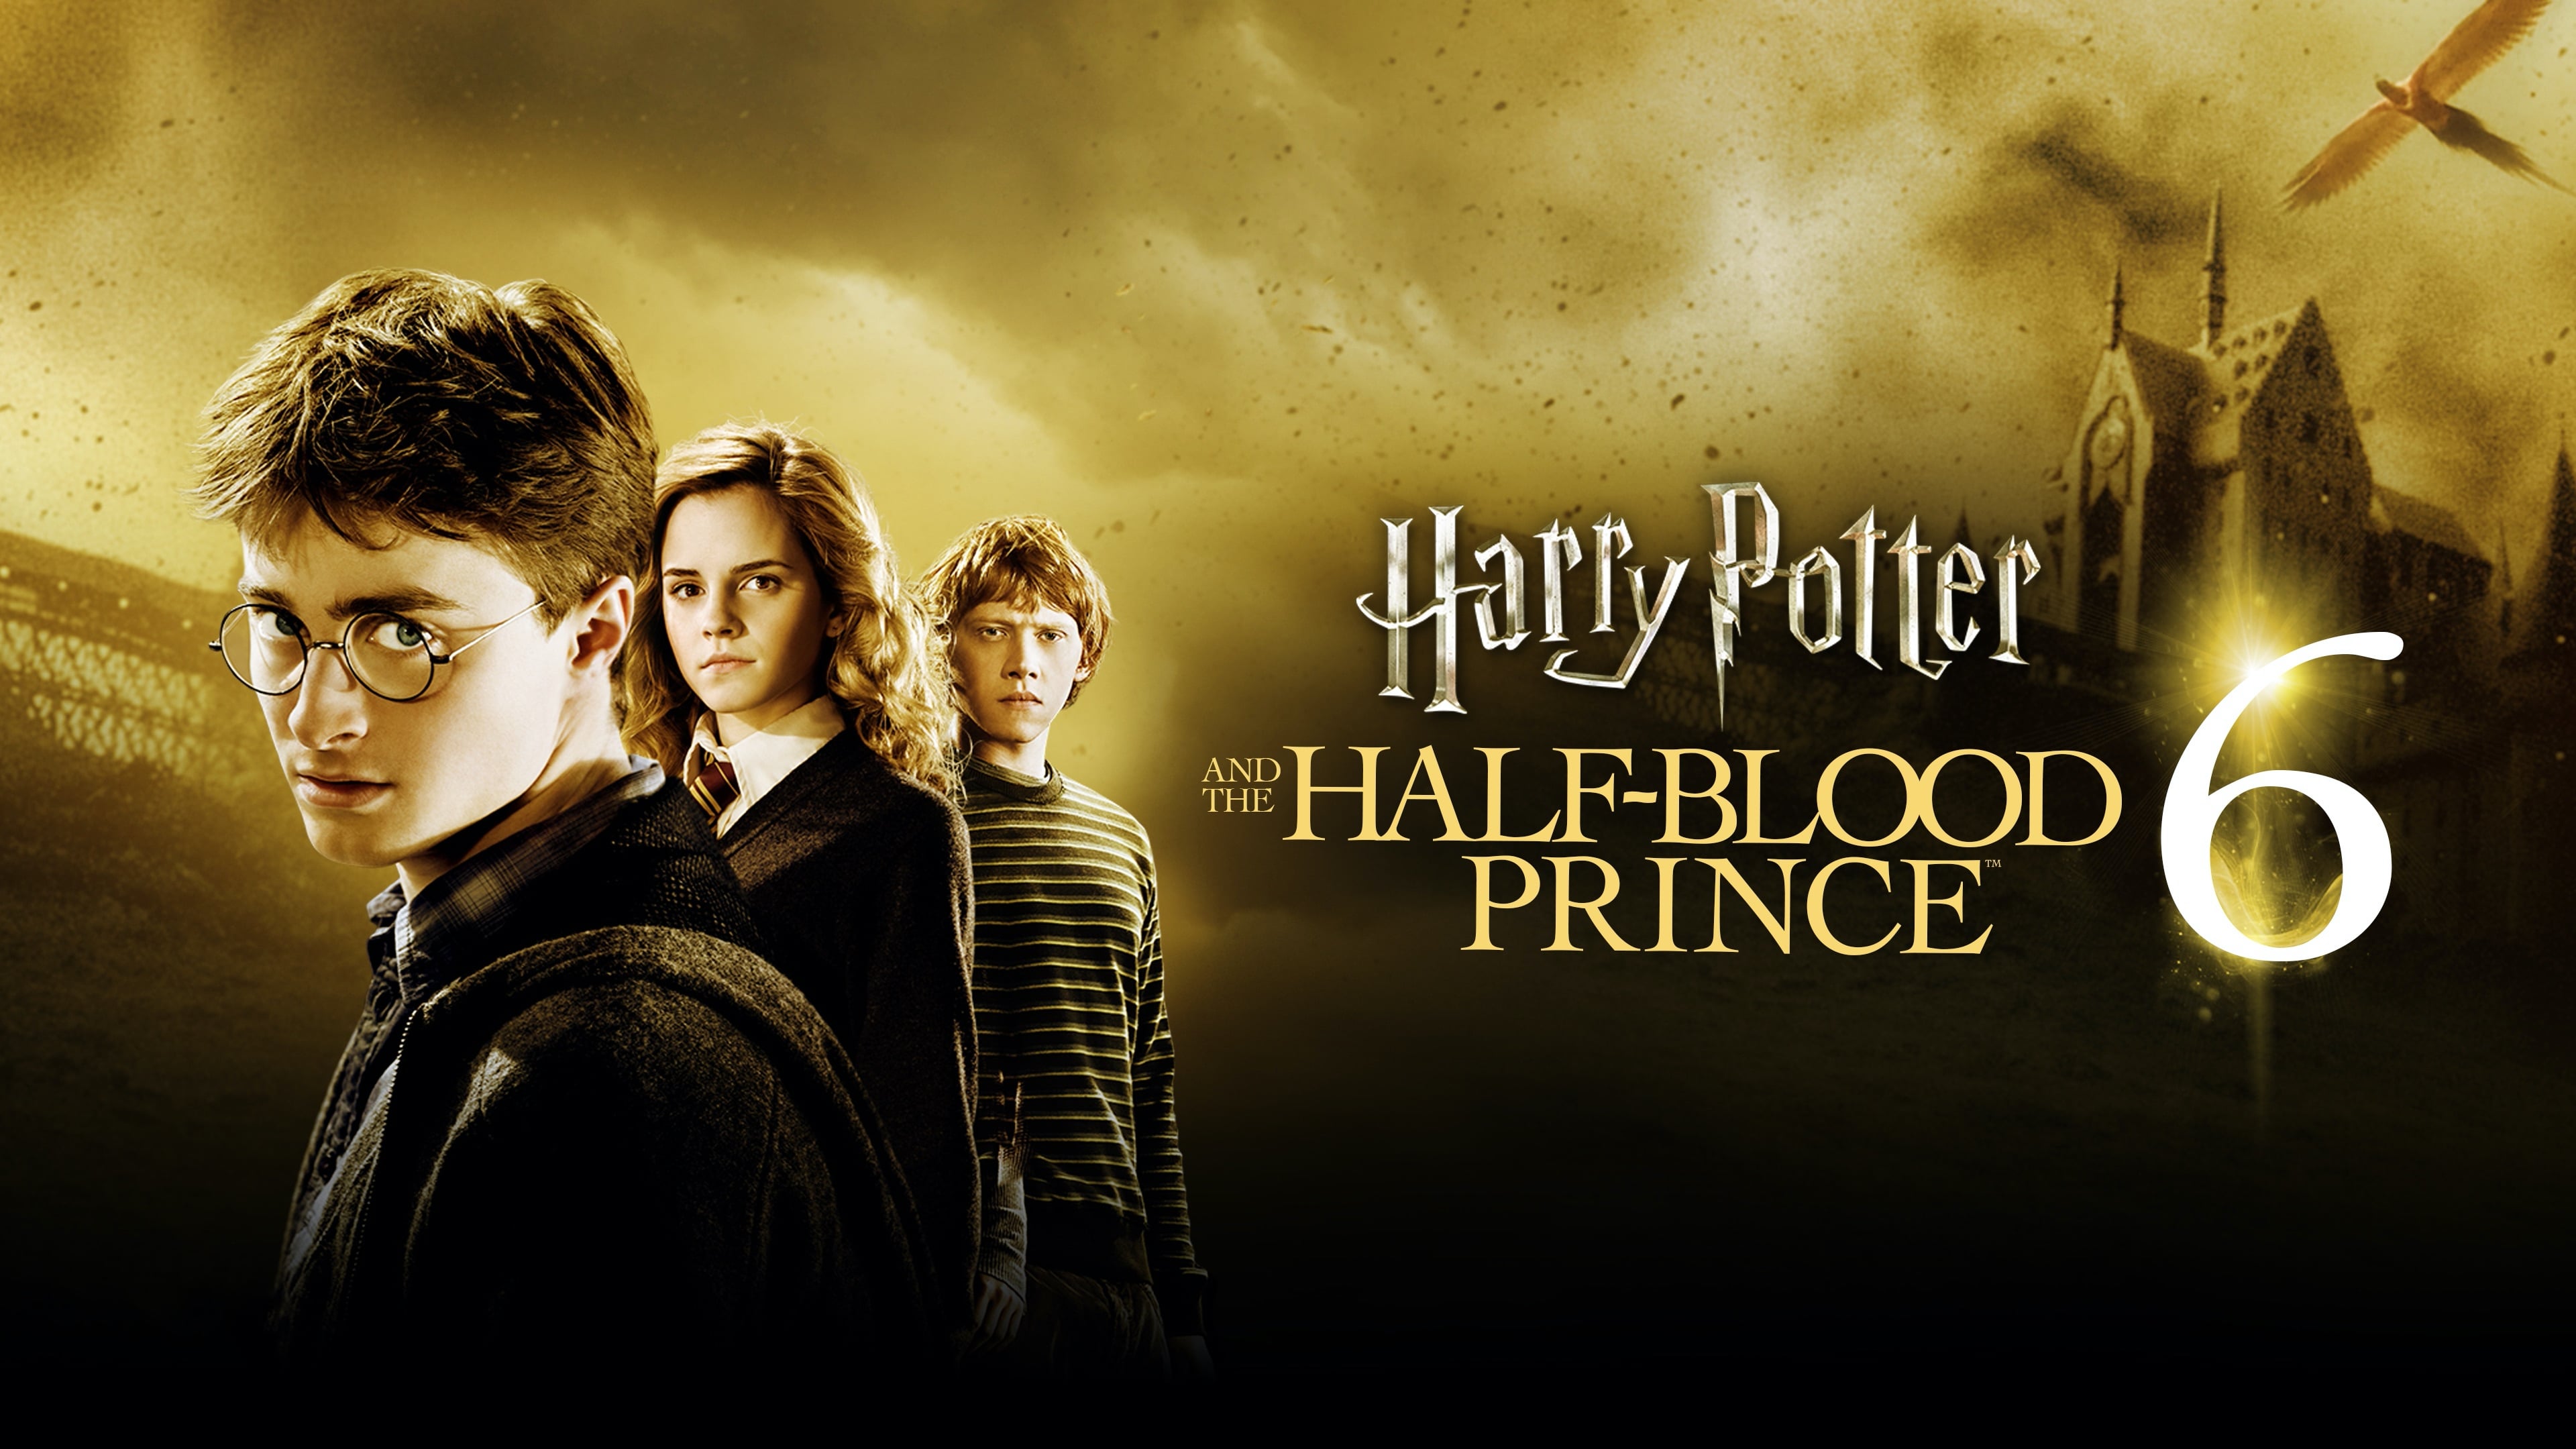 Harry Potter and the Half-Blood Prince (2009) - AZ Movies